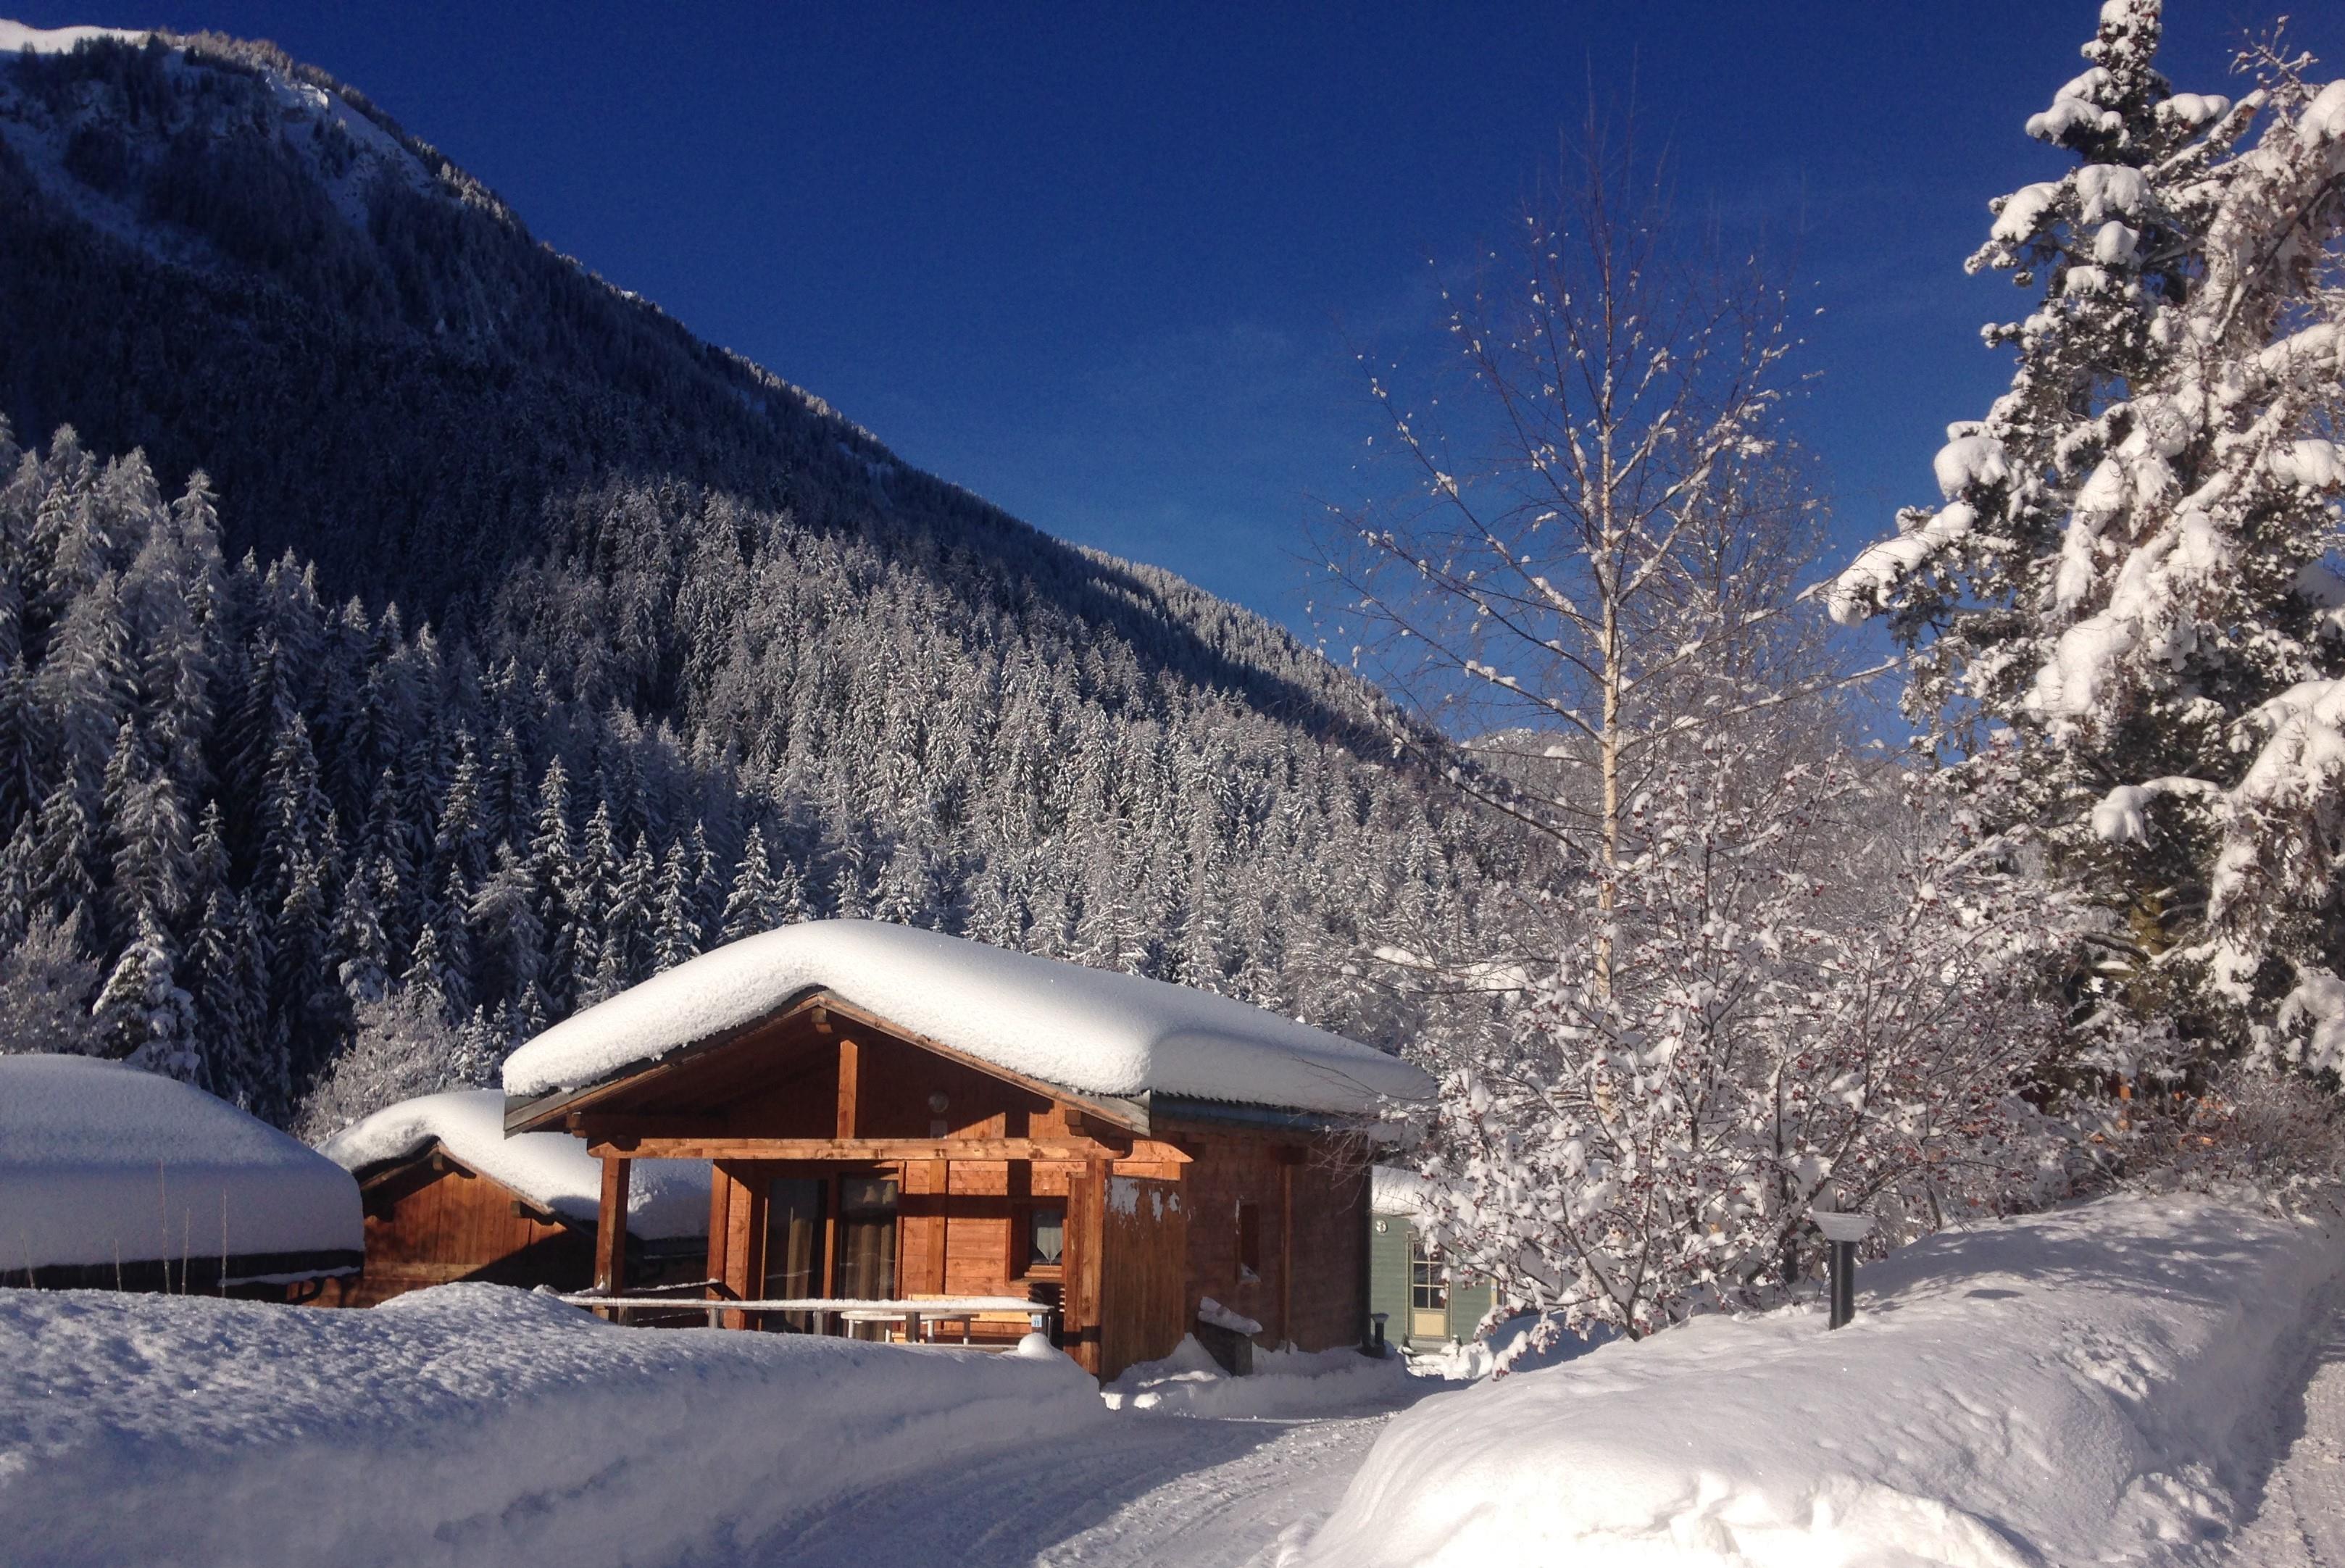 Accommodation - Gamme Tradition - Chalet Vanoise 35M² 2 Bedrooms + Terrace 15M² - Camping Les Lanchettes